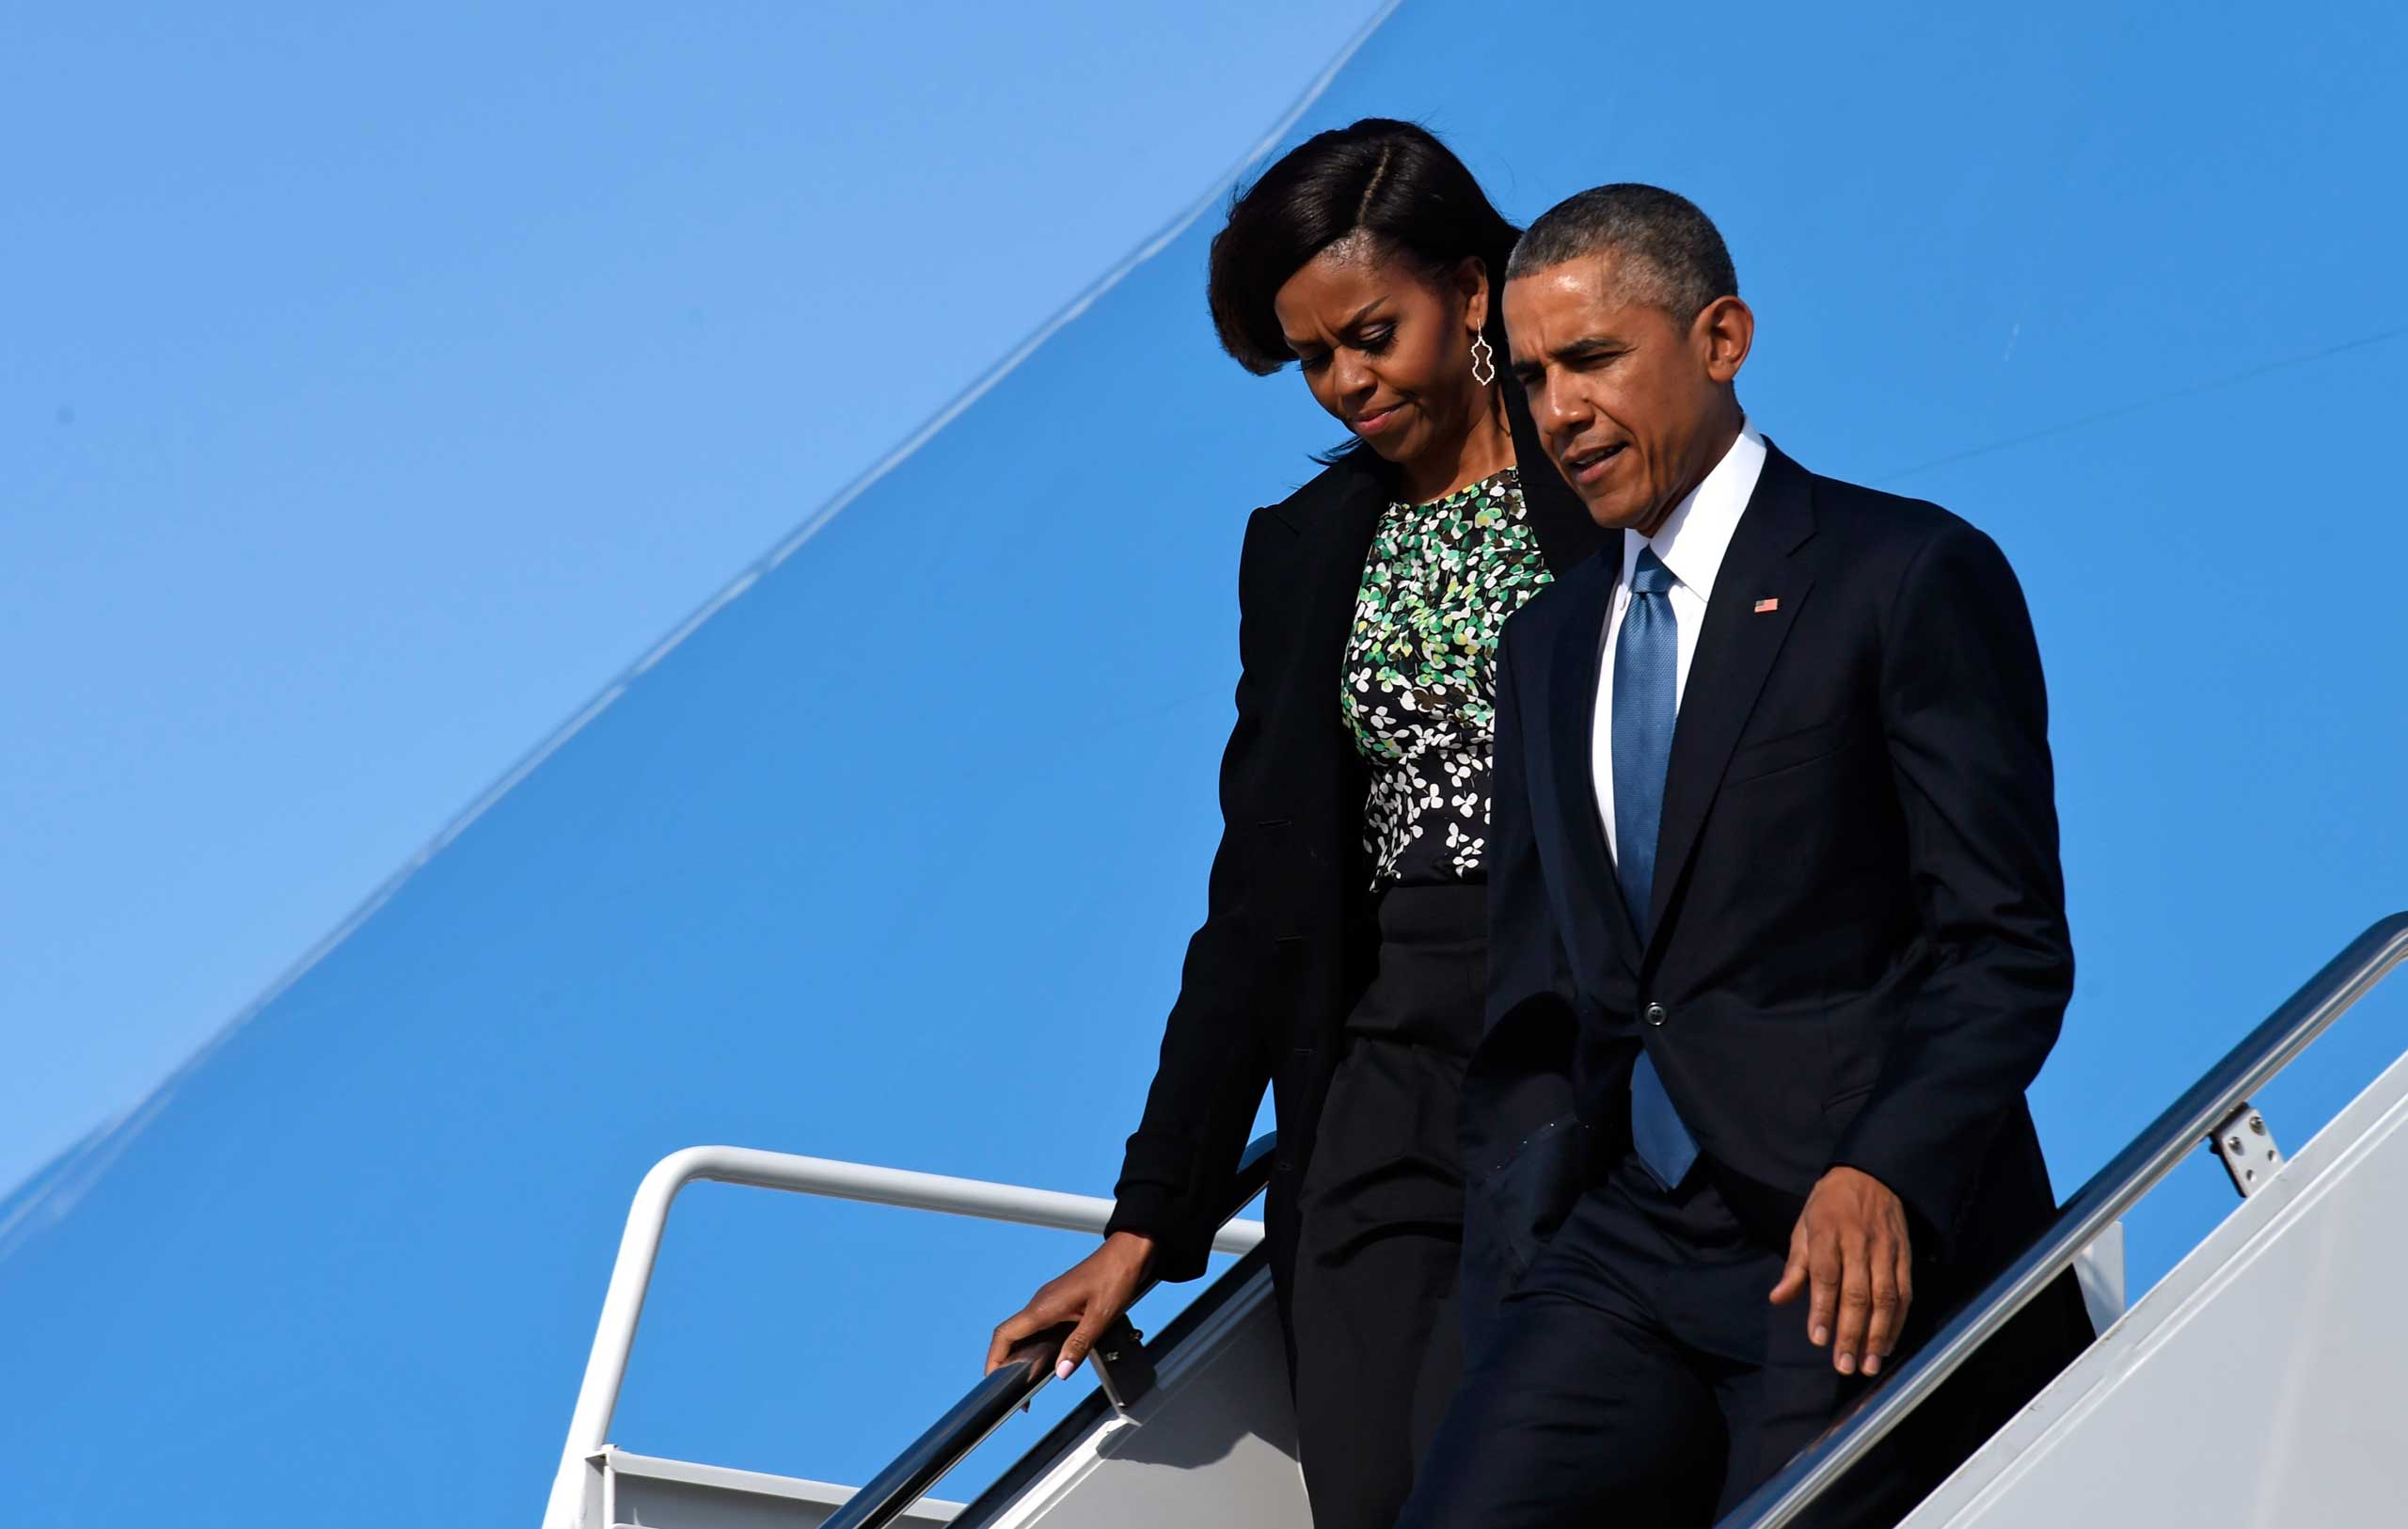 U.S. President Barack Obama and First Lady Michelle Obama walk down the steps of Air Force One at Andrews Air Force Base in Maryland on March 30, 2015 (Susan Walsh&mdash;AP)